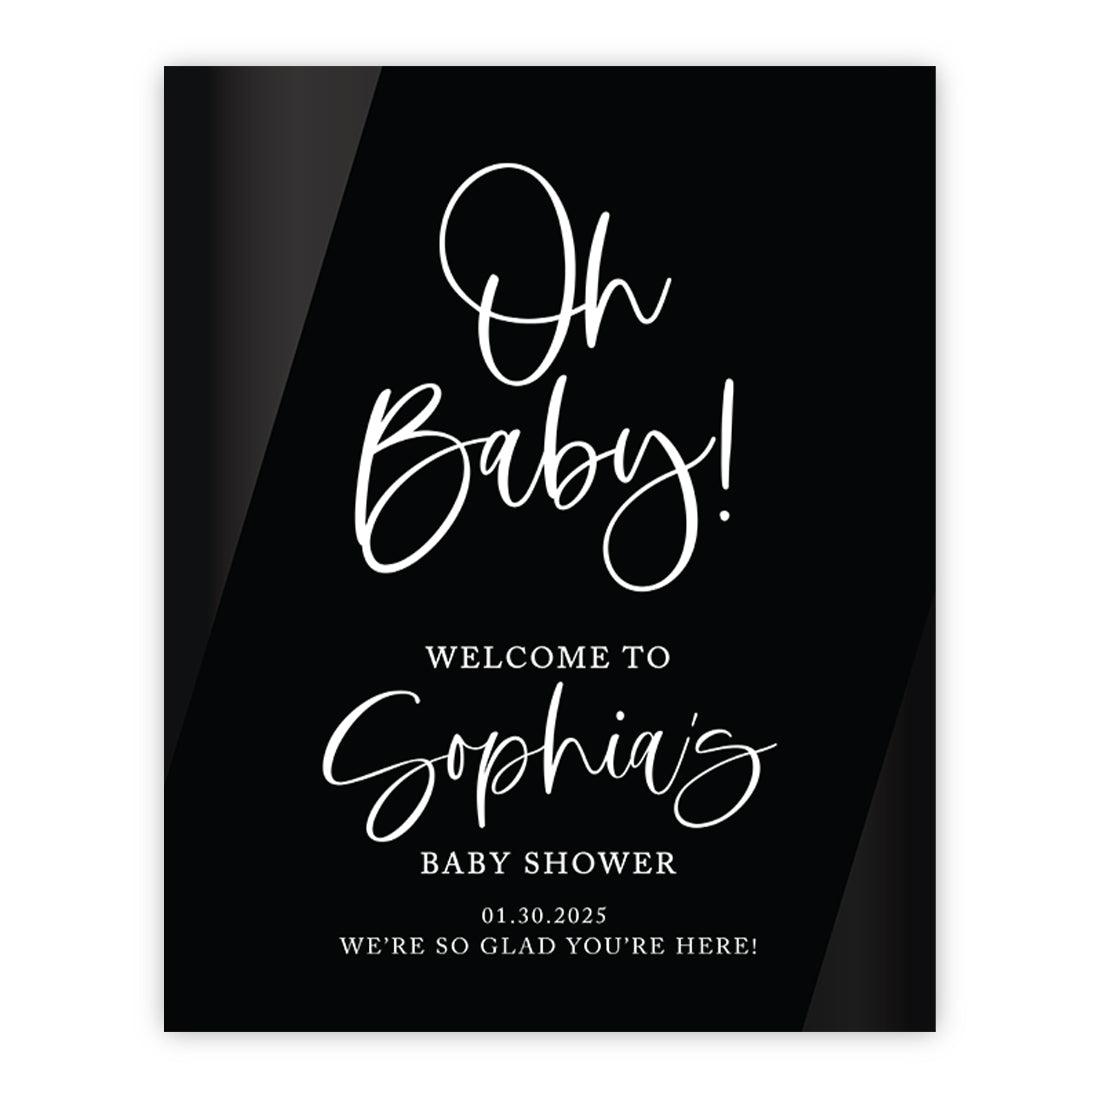 Oh Baby Acrylic Baby Shower Welcome Sign